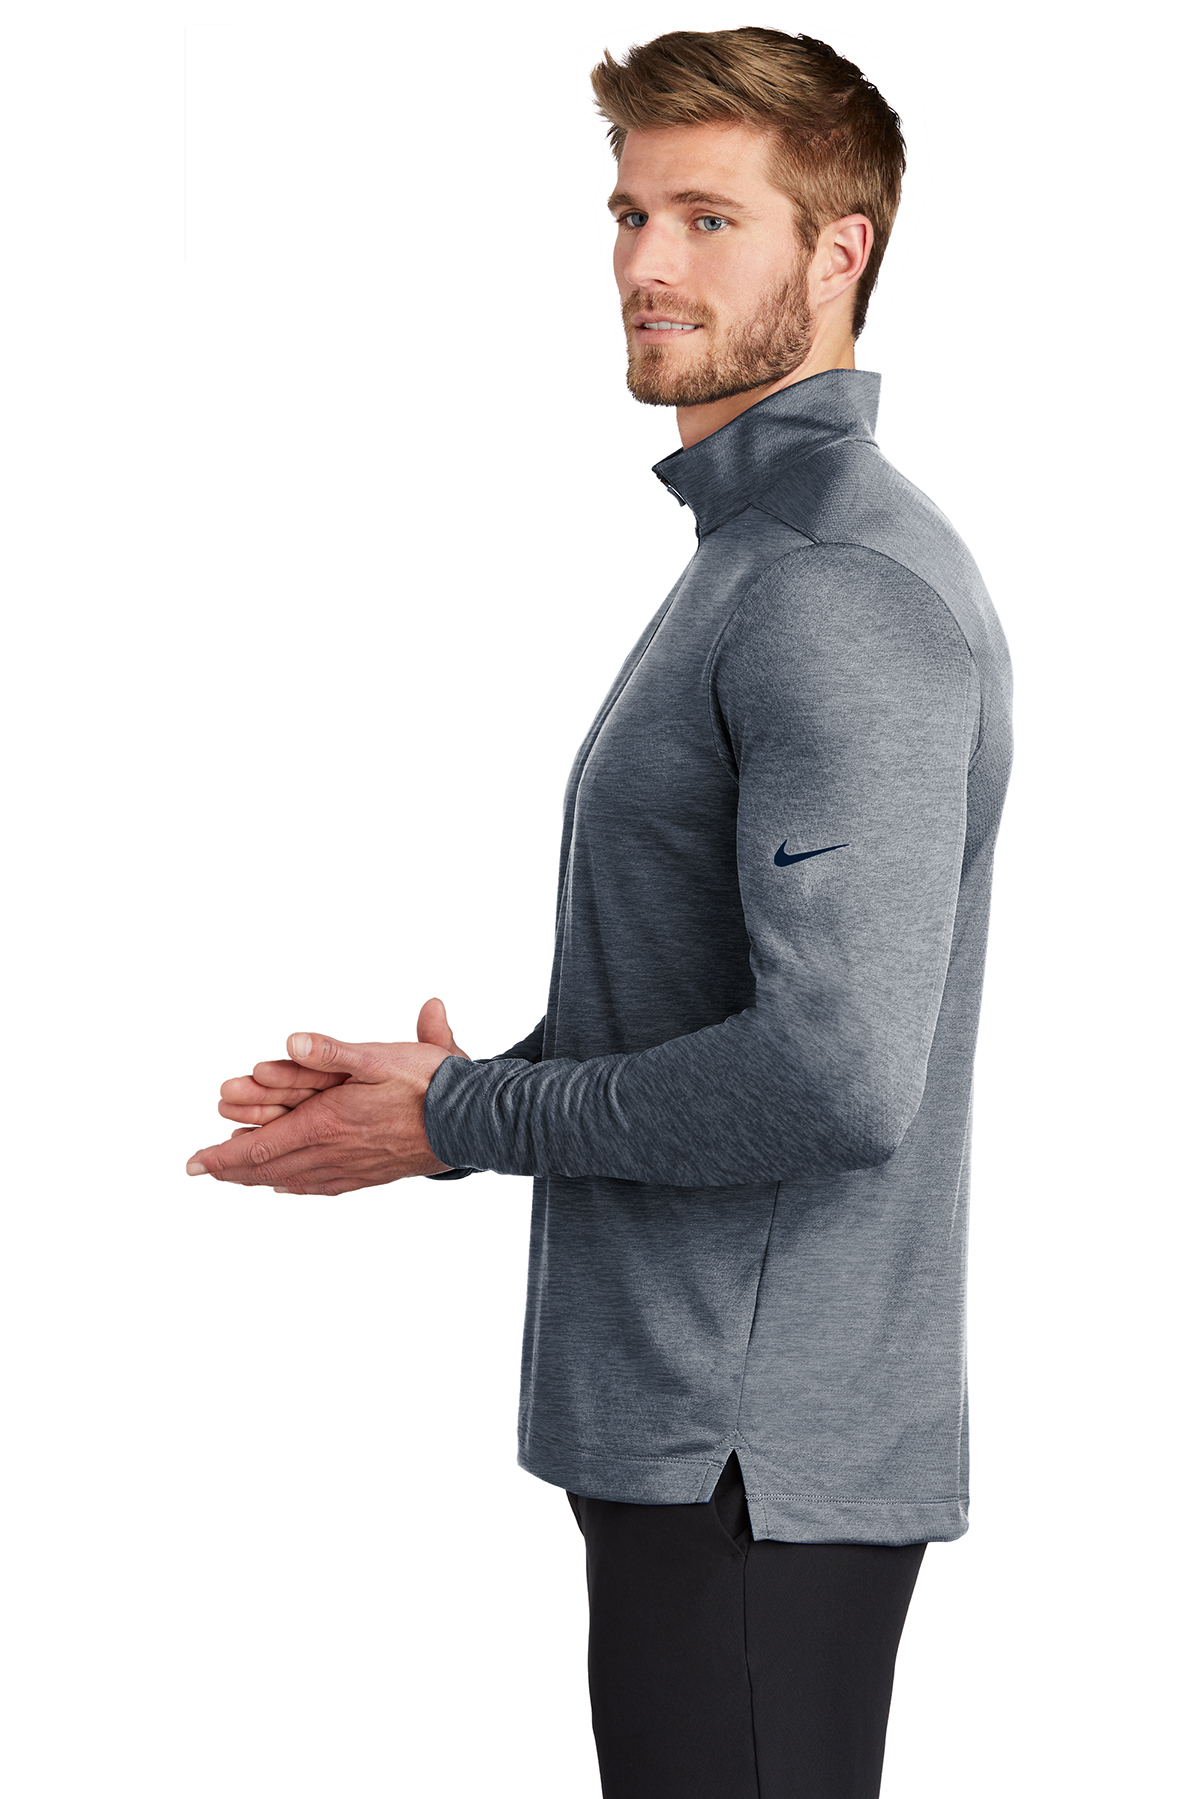 Nike Product | Cover-Up Dry SanMar 1/2-Zip |